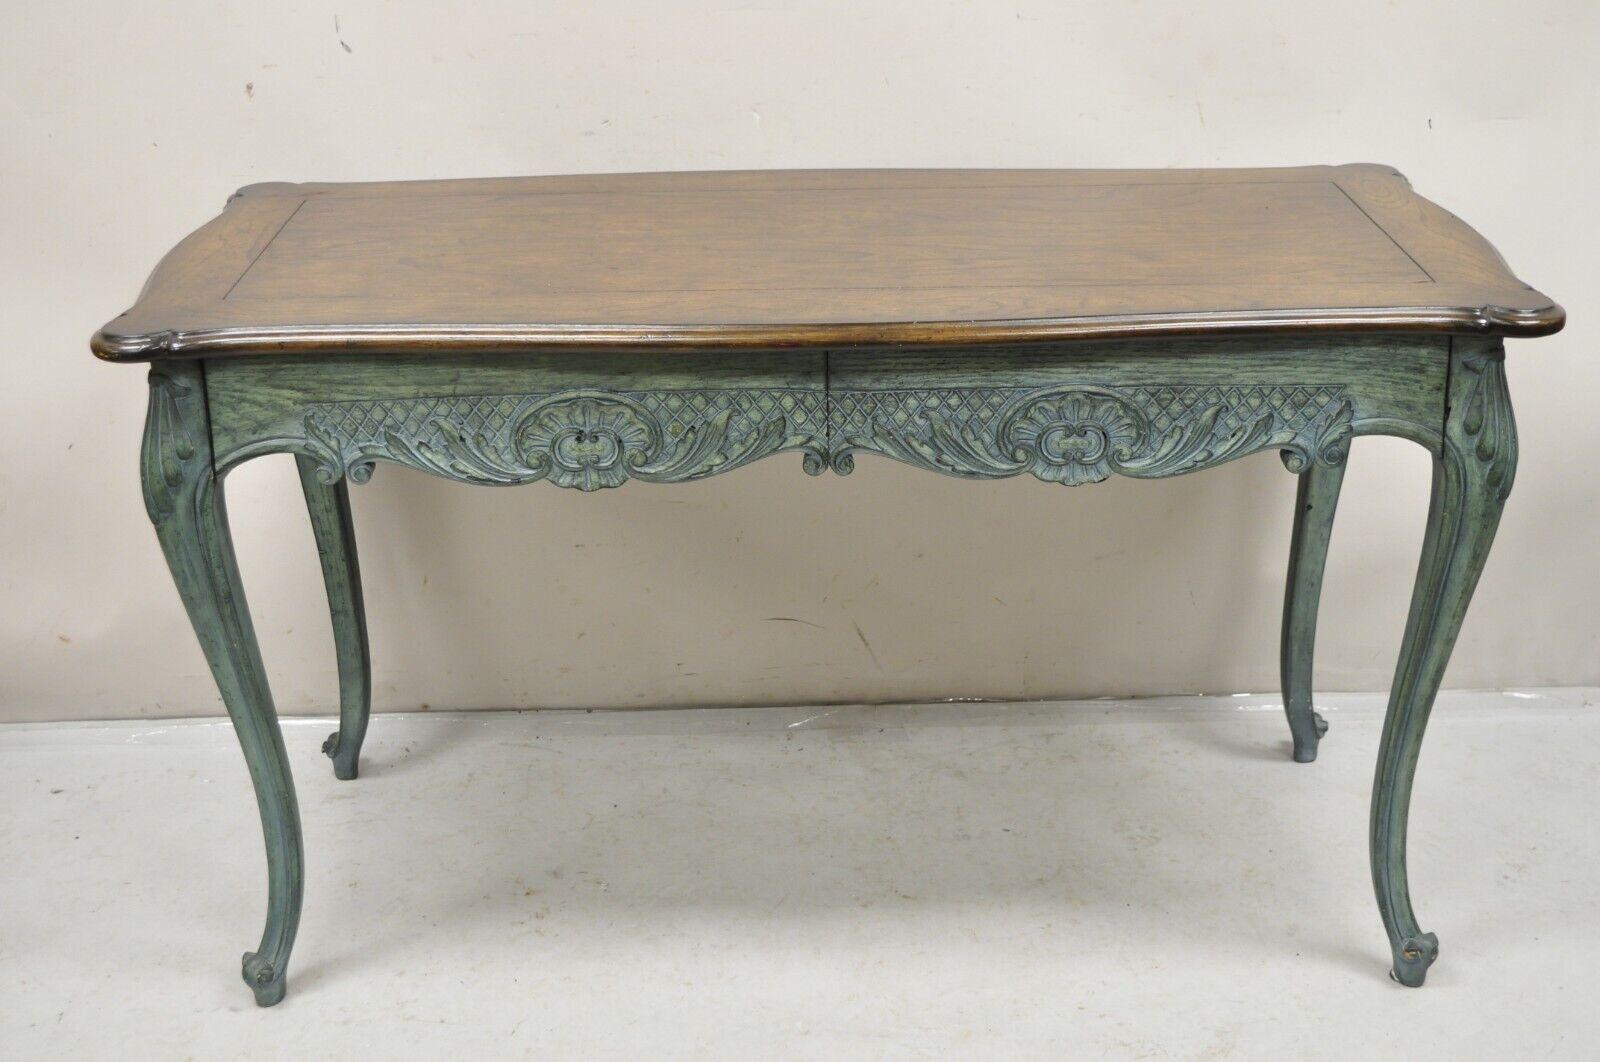 Vintage French Country Provincial Style Shell Carved Blue Painted 2 Drawer Desk. Item features  2 drawers, blue distressed painted finish, solid wood construction, carved and finish back, quality American craftsmanship. Circa Mid 20th Century.